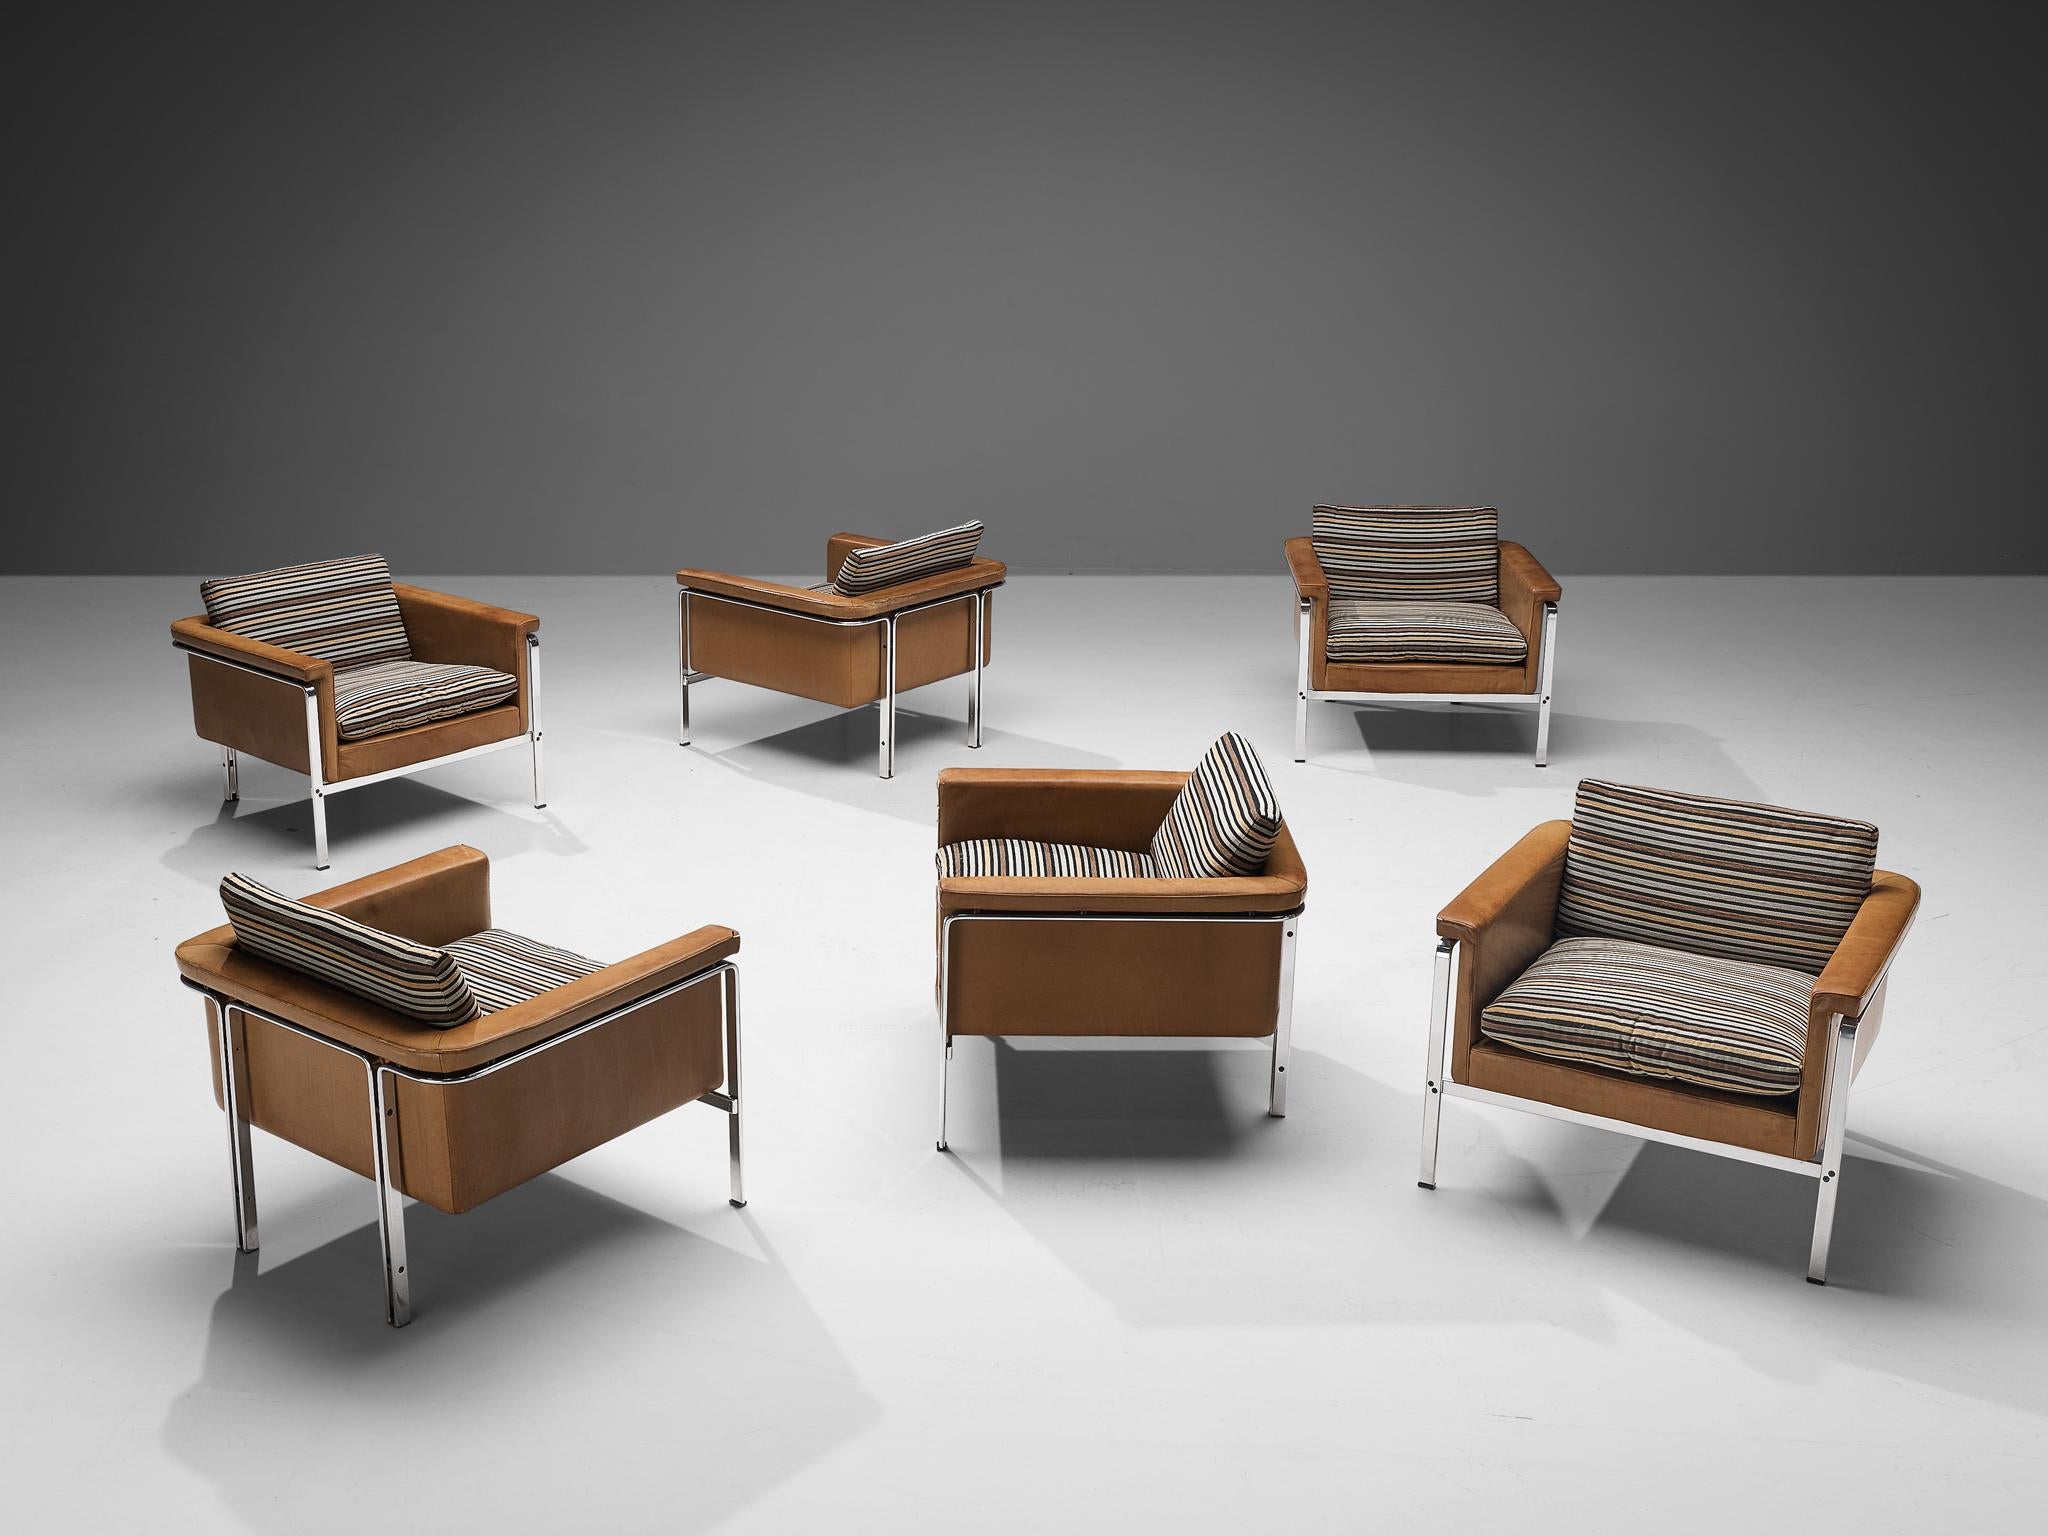 Horst Brüning for Kill International Lounge Chairs in Cognac Leather